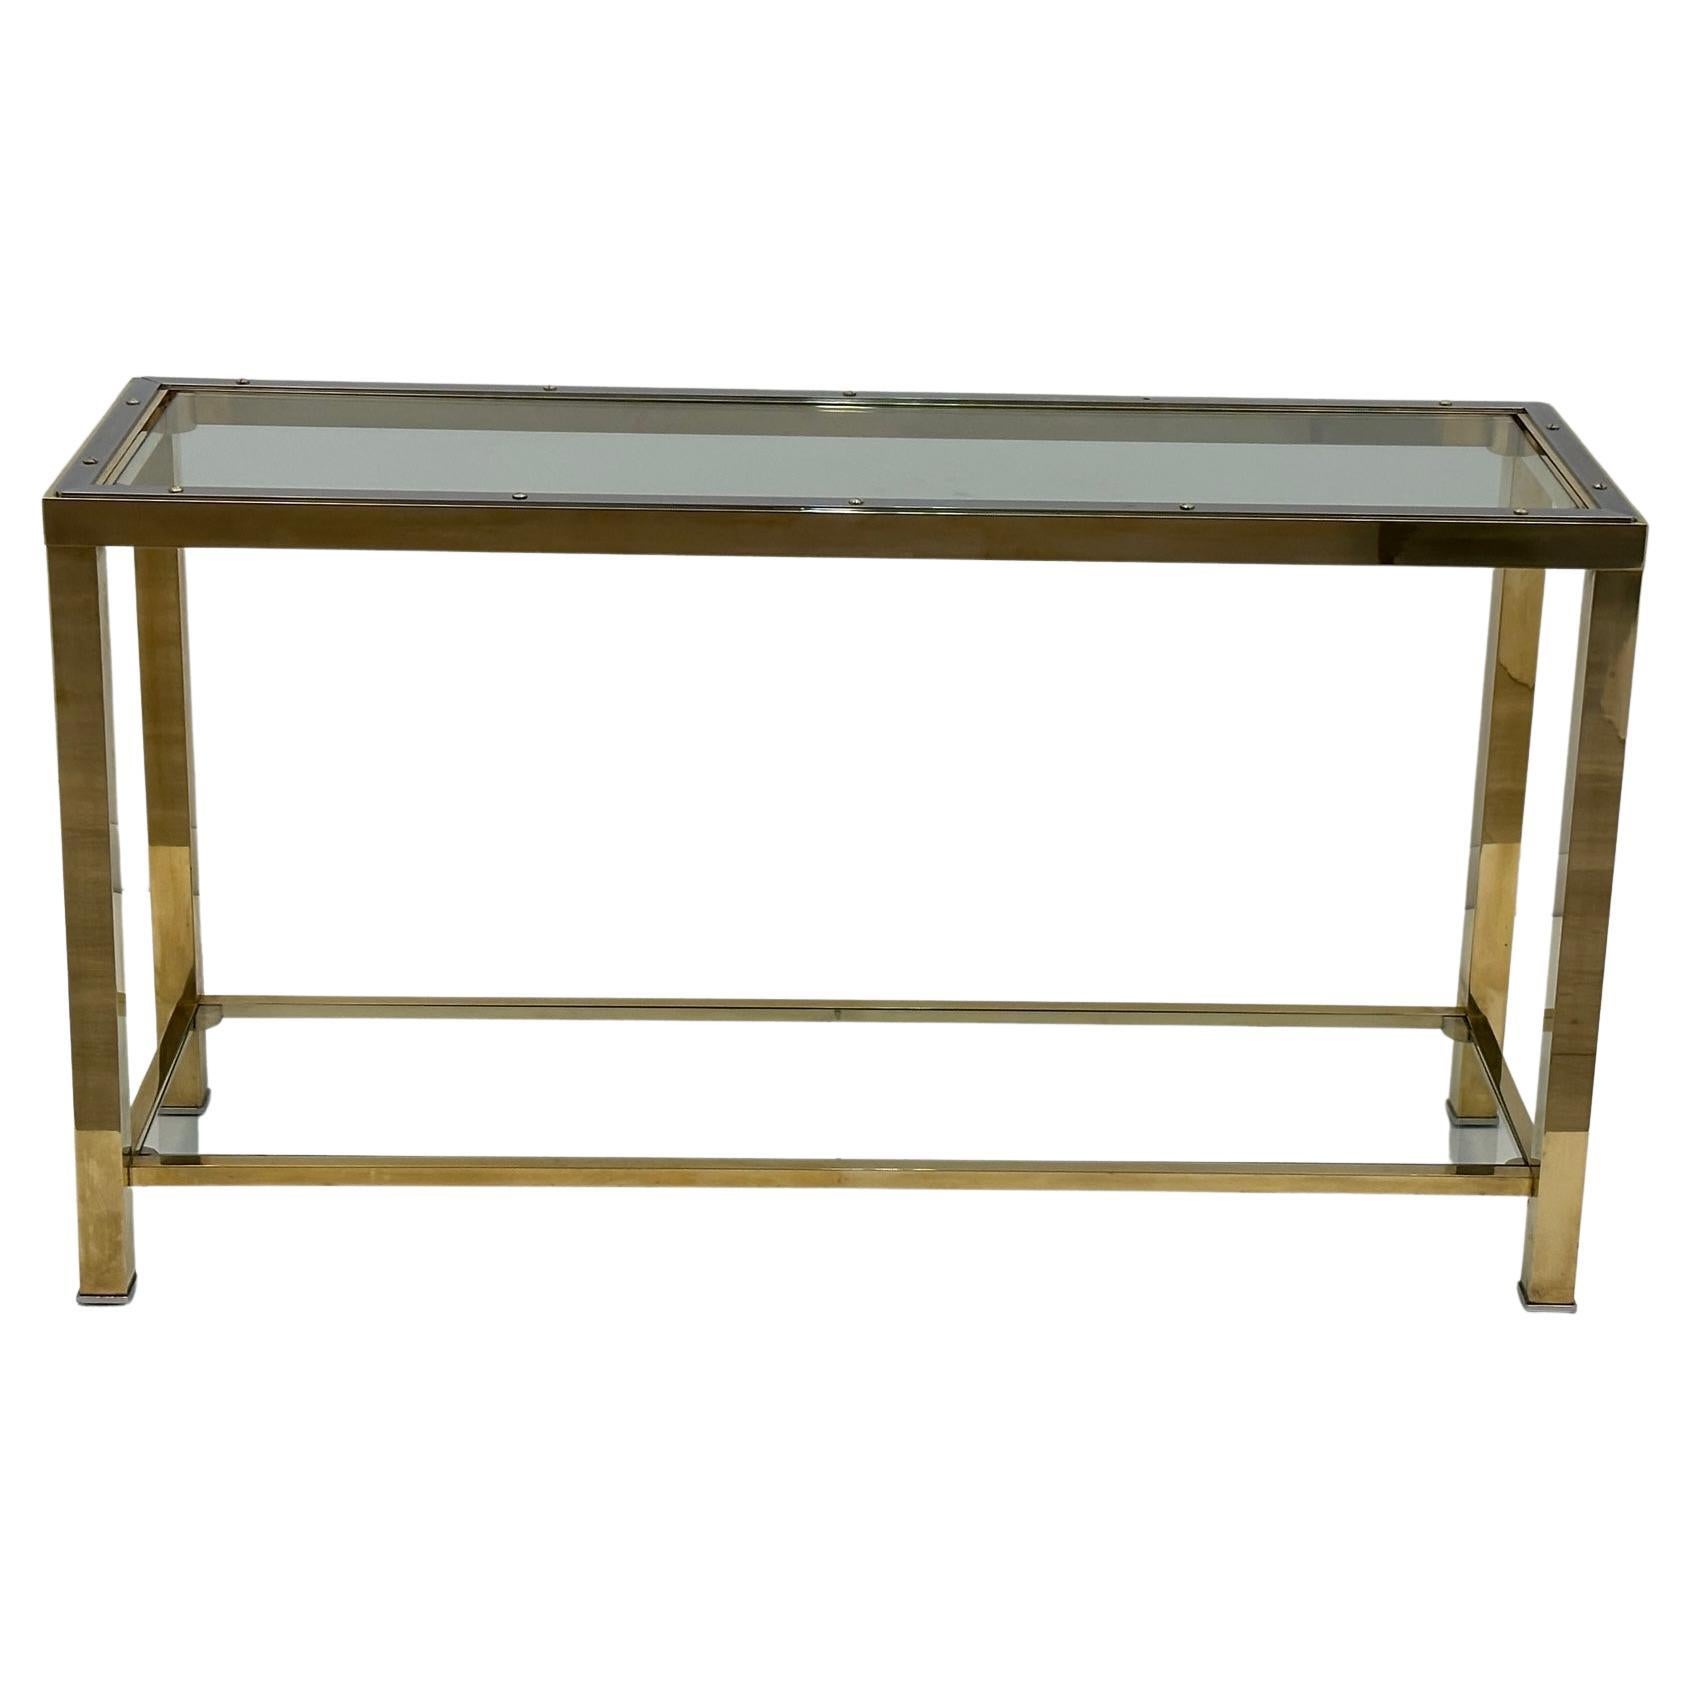 Sophisticated Brass Glass and Chrome Console Table Attributed to Pierre Cardin